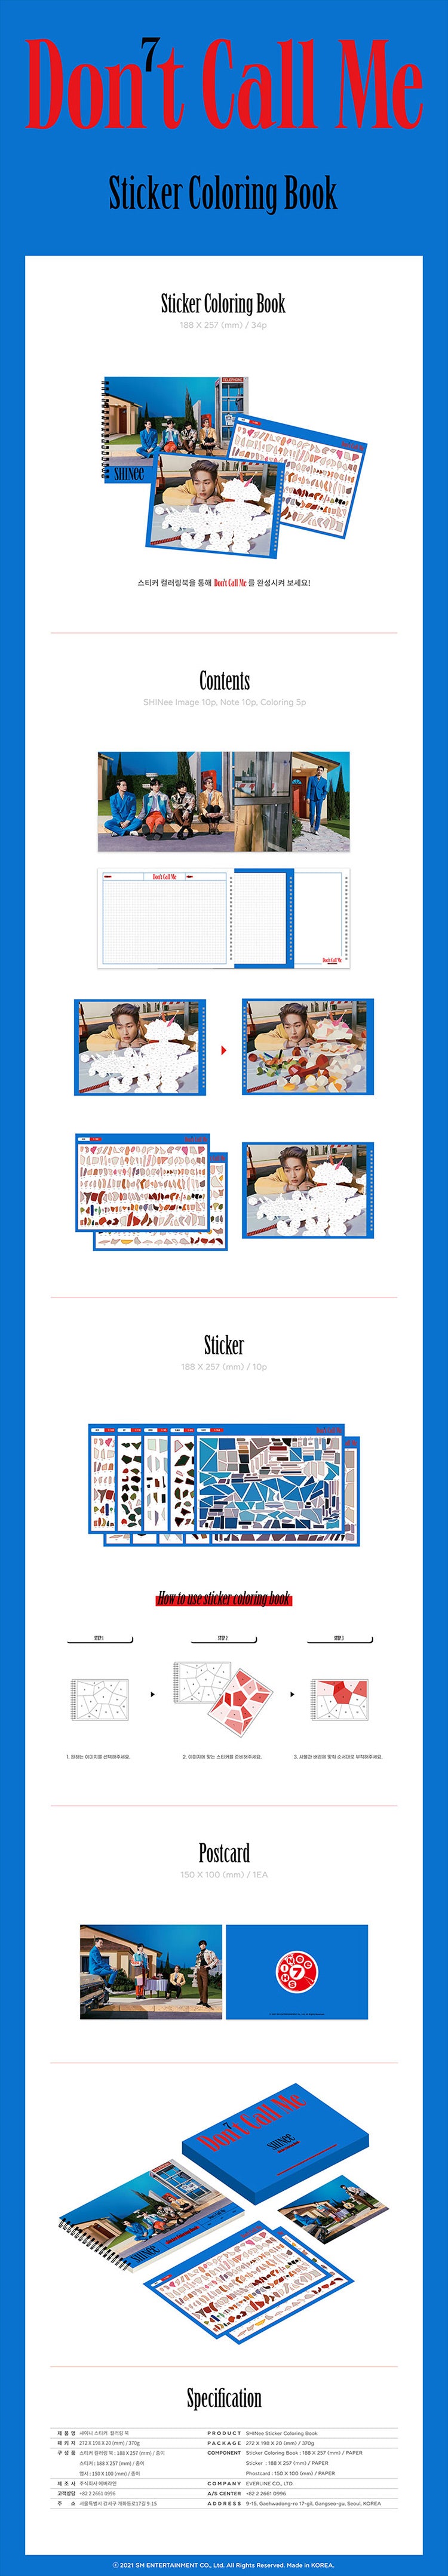 SHINee - Sticker Coloring Book [Don't Call Me]